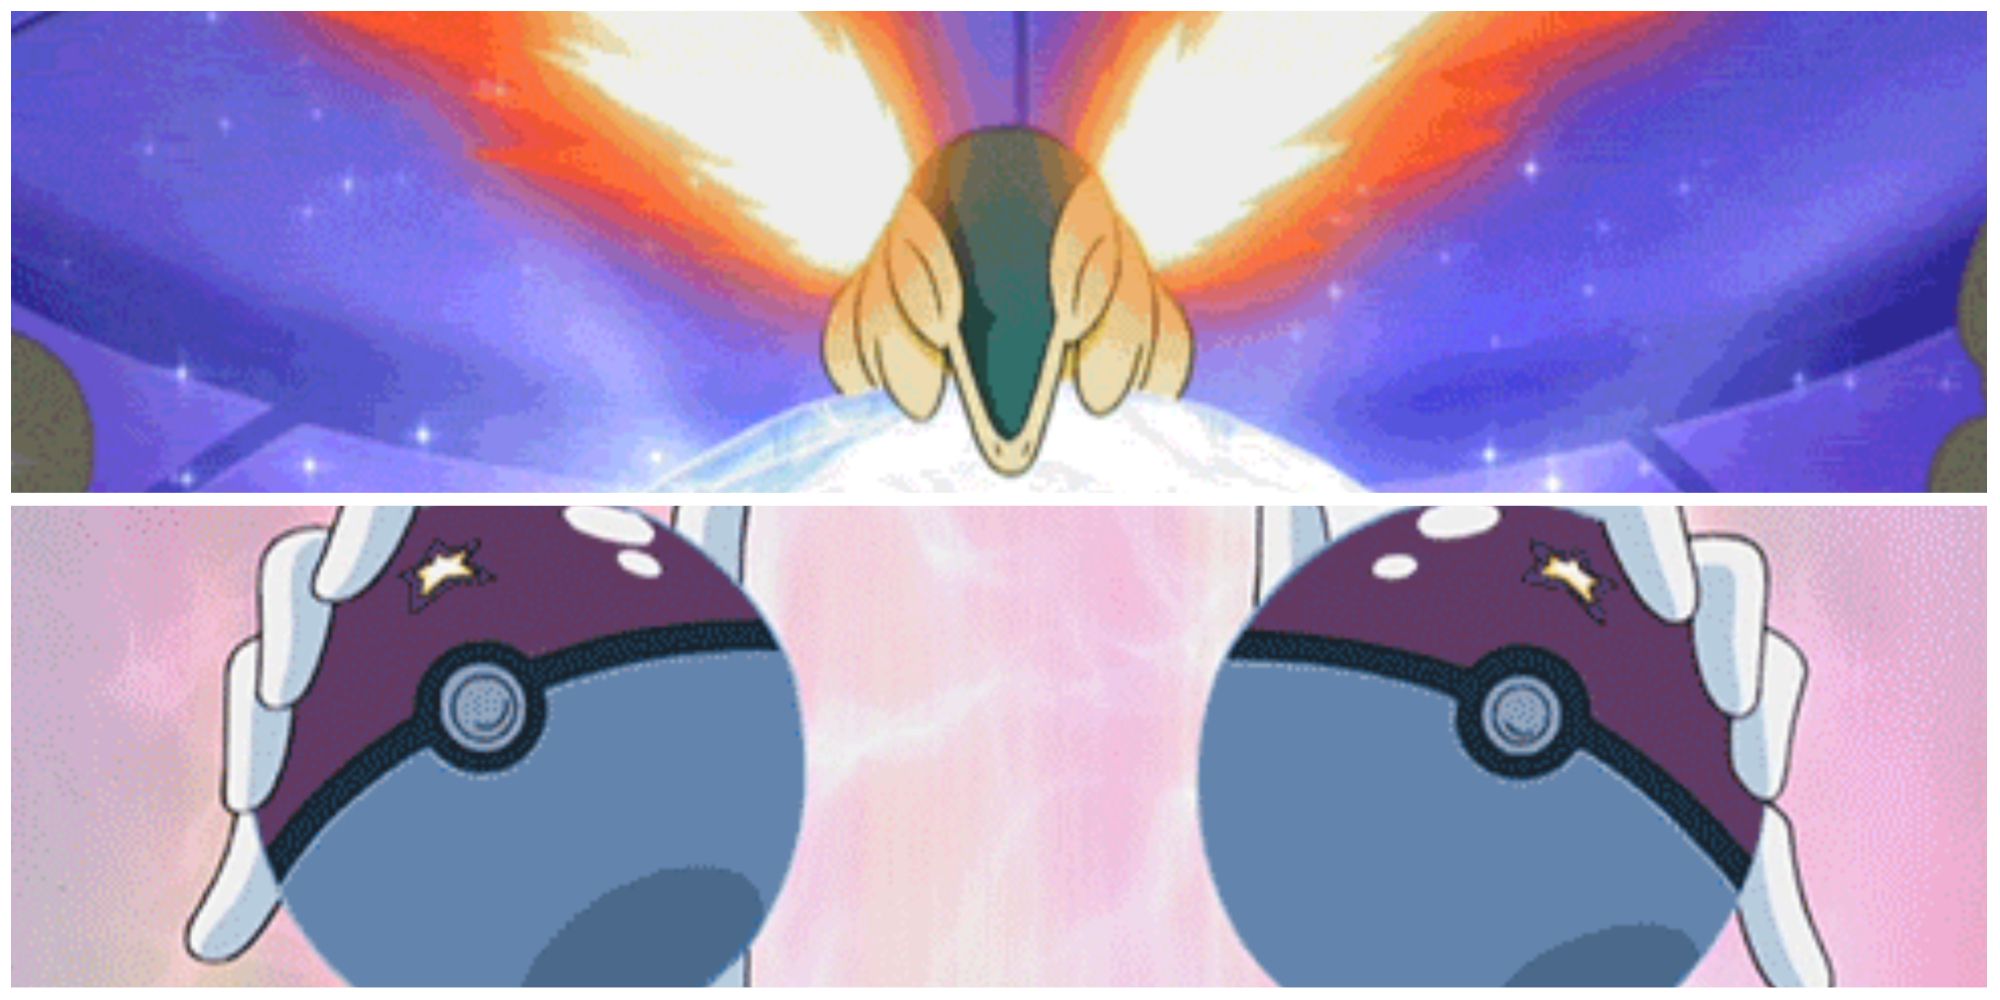 Dawn holding up two Pokeballs concealed by ball capsules and sealed with star seals. And an image of Cyndaquil shooting out flames.